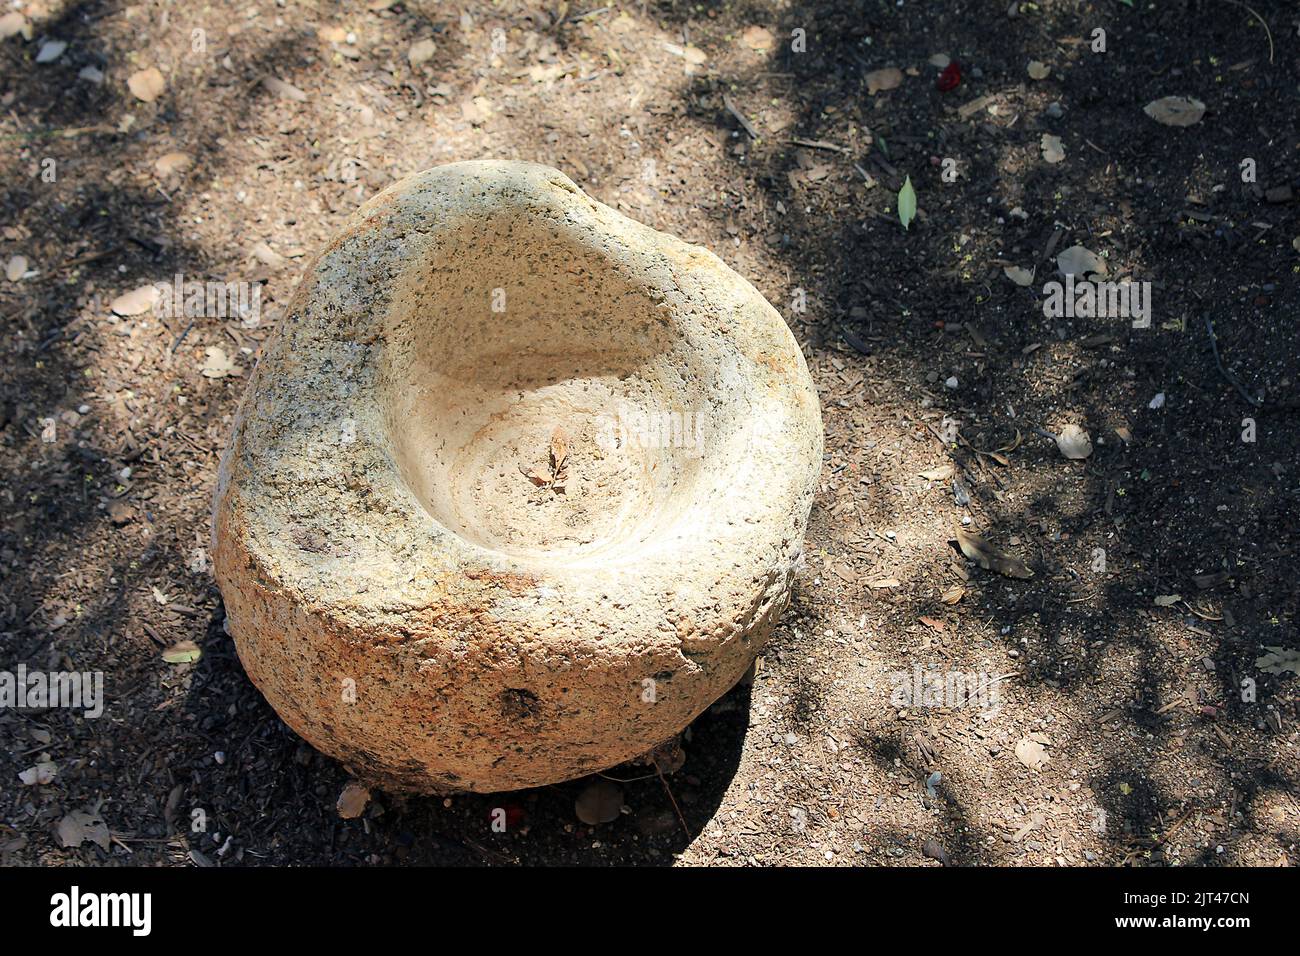 Native American Grind stone for grinding grain Stock Photo